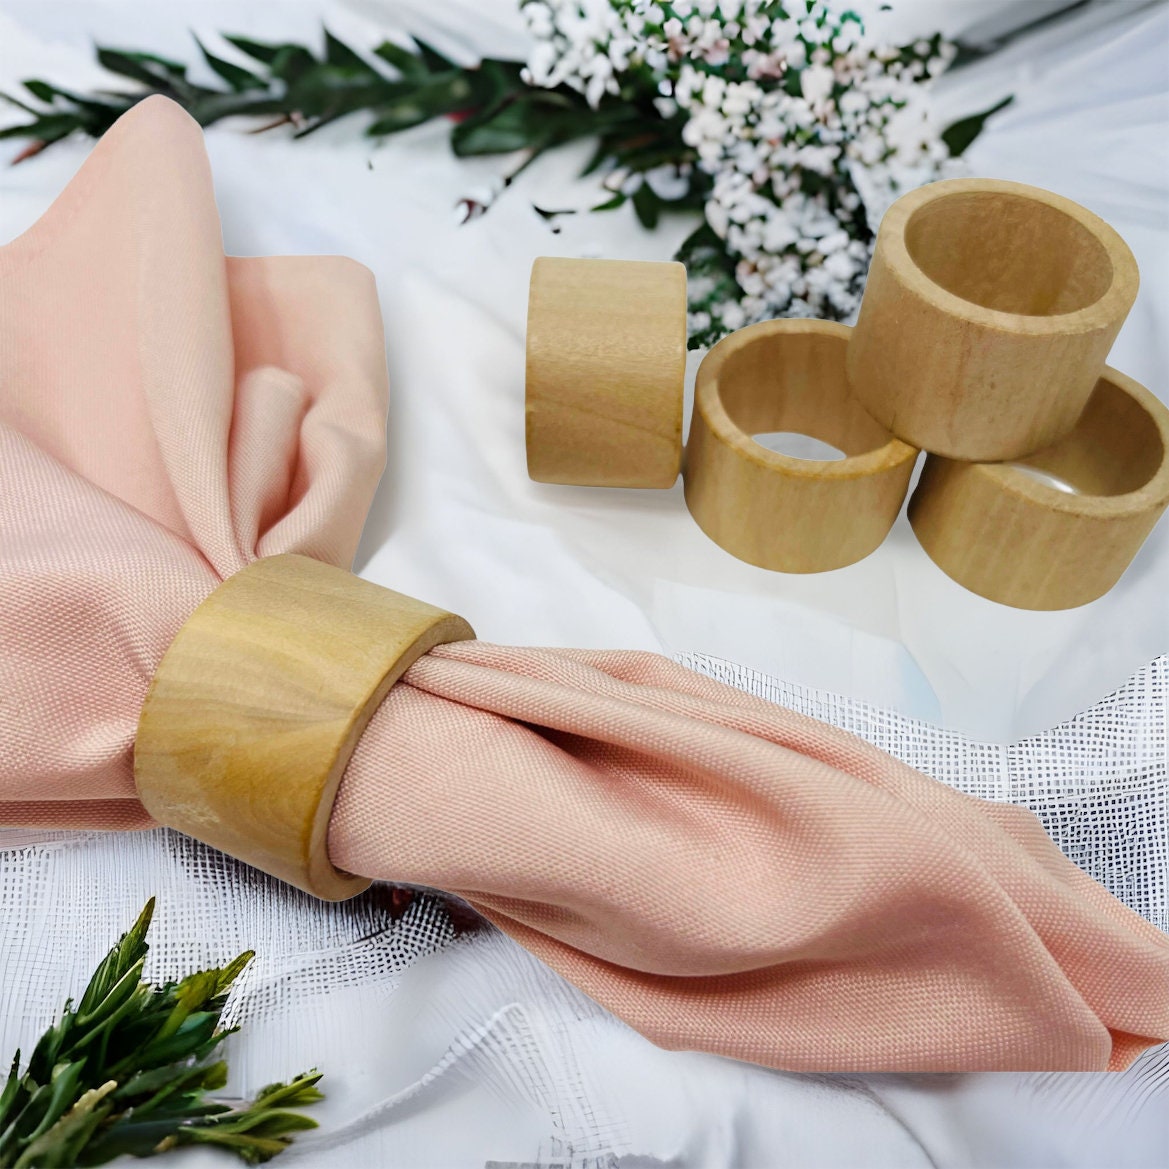 DIY Wooden Napkin Rings | Dunn DIY Tutorials and Projects